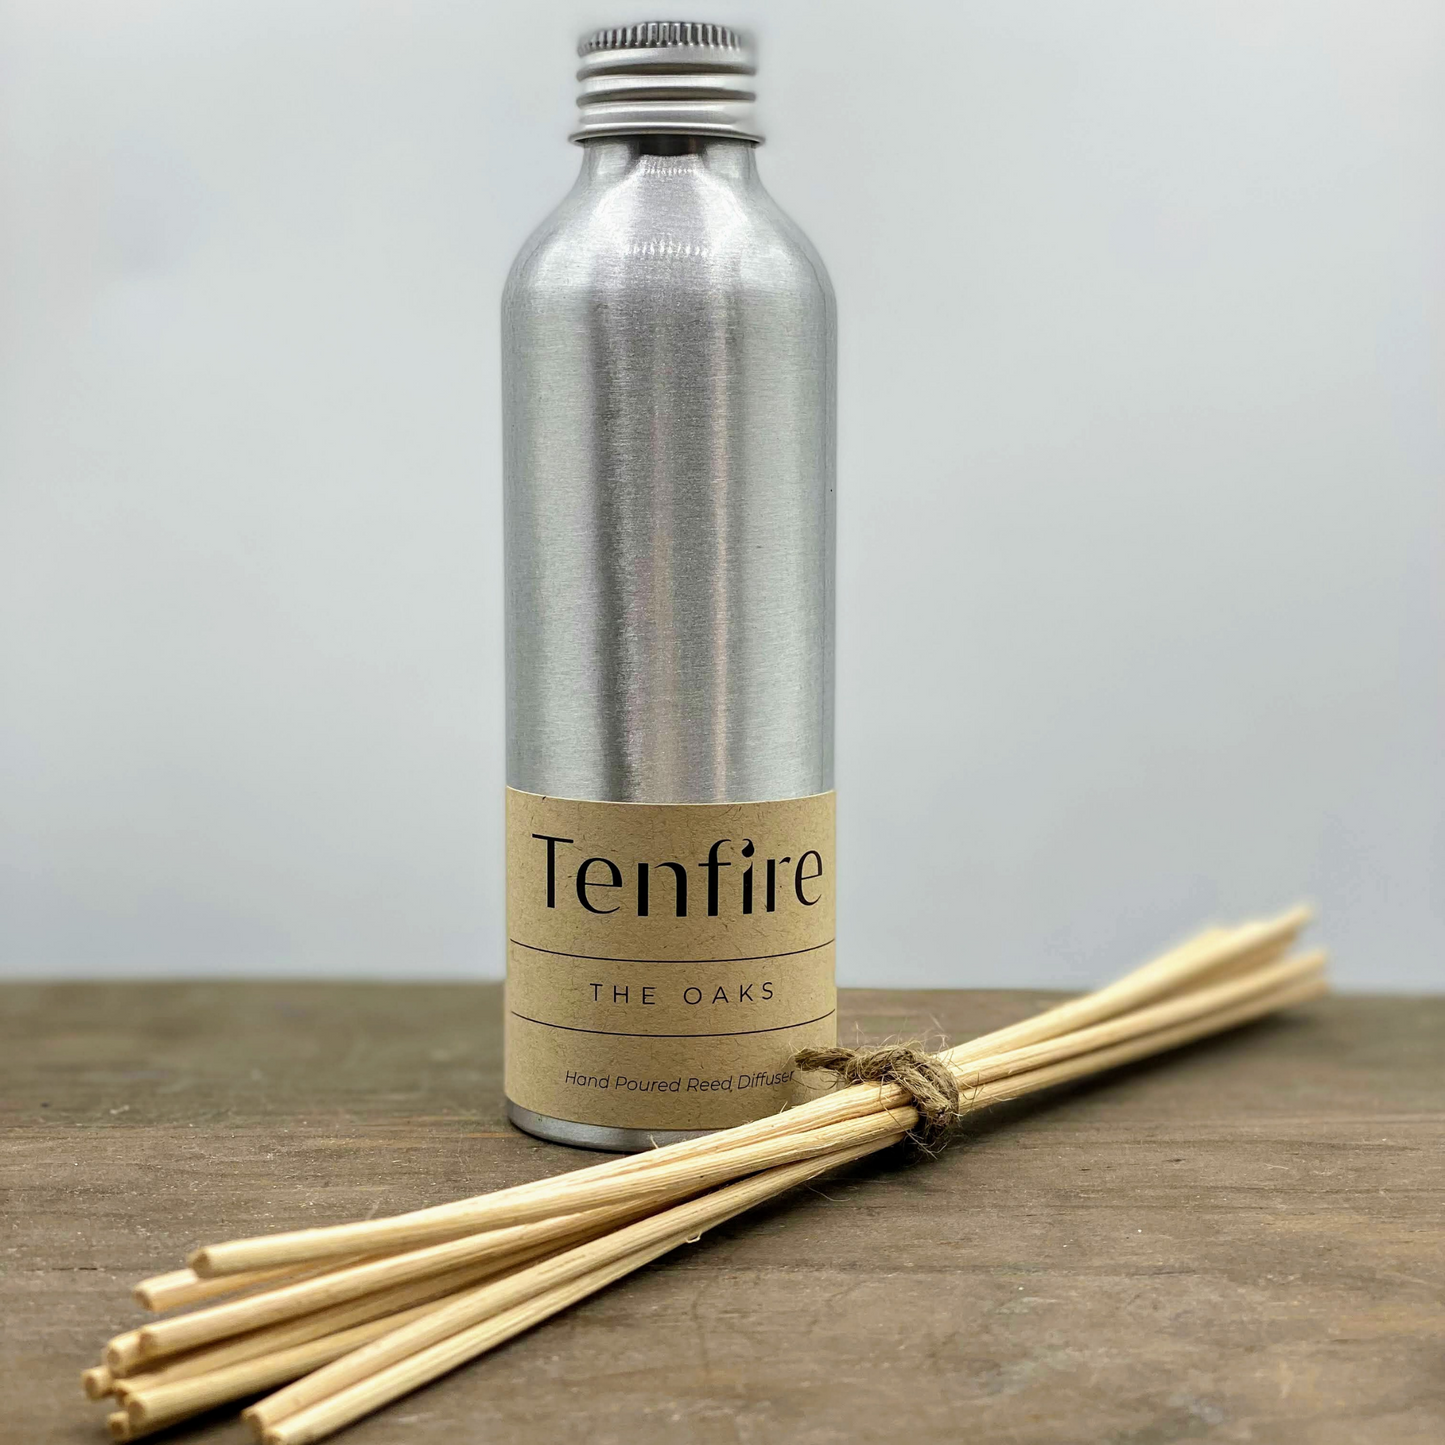 silver metal bottle reed diffuser with bamboo reeds tied next to it